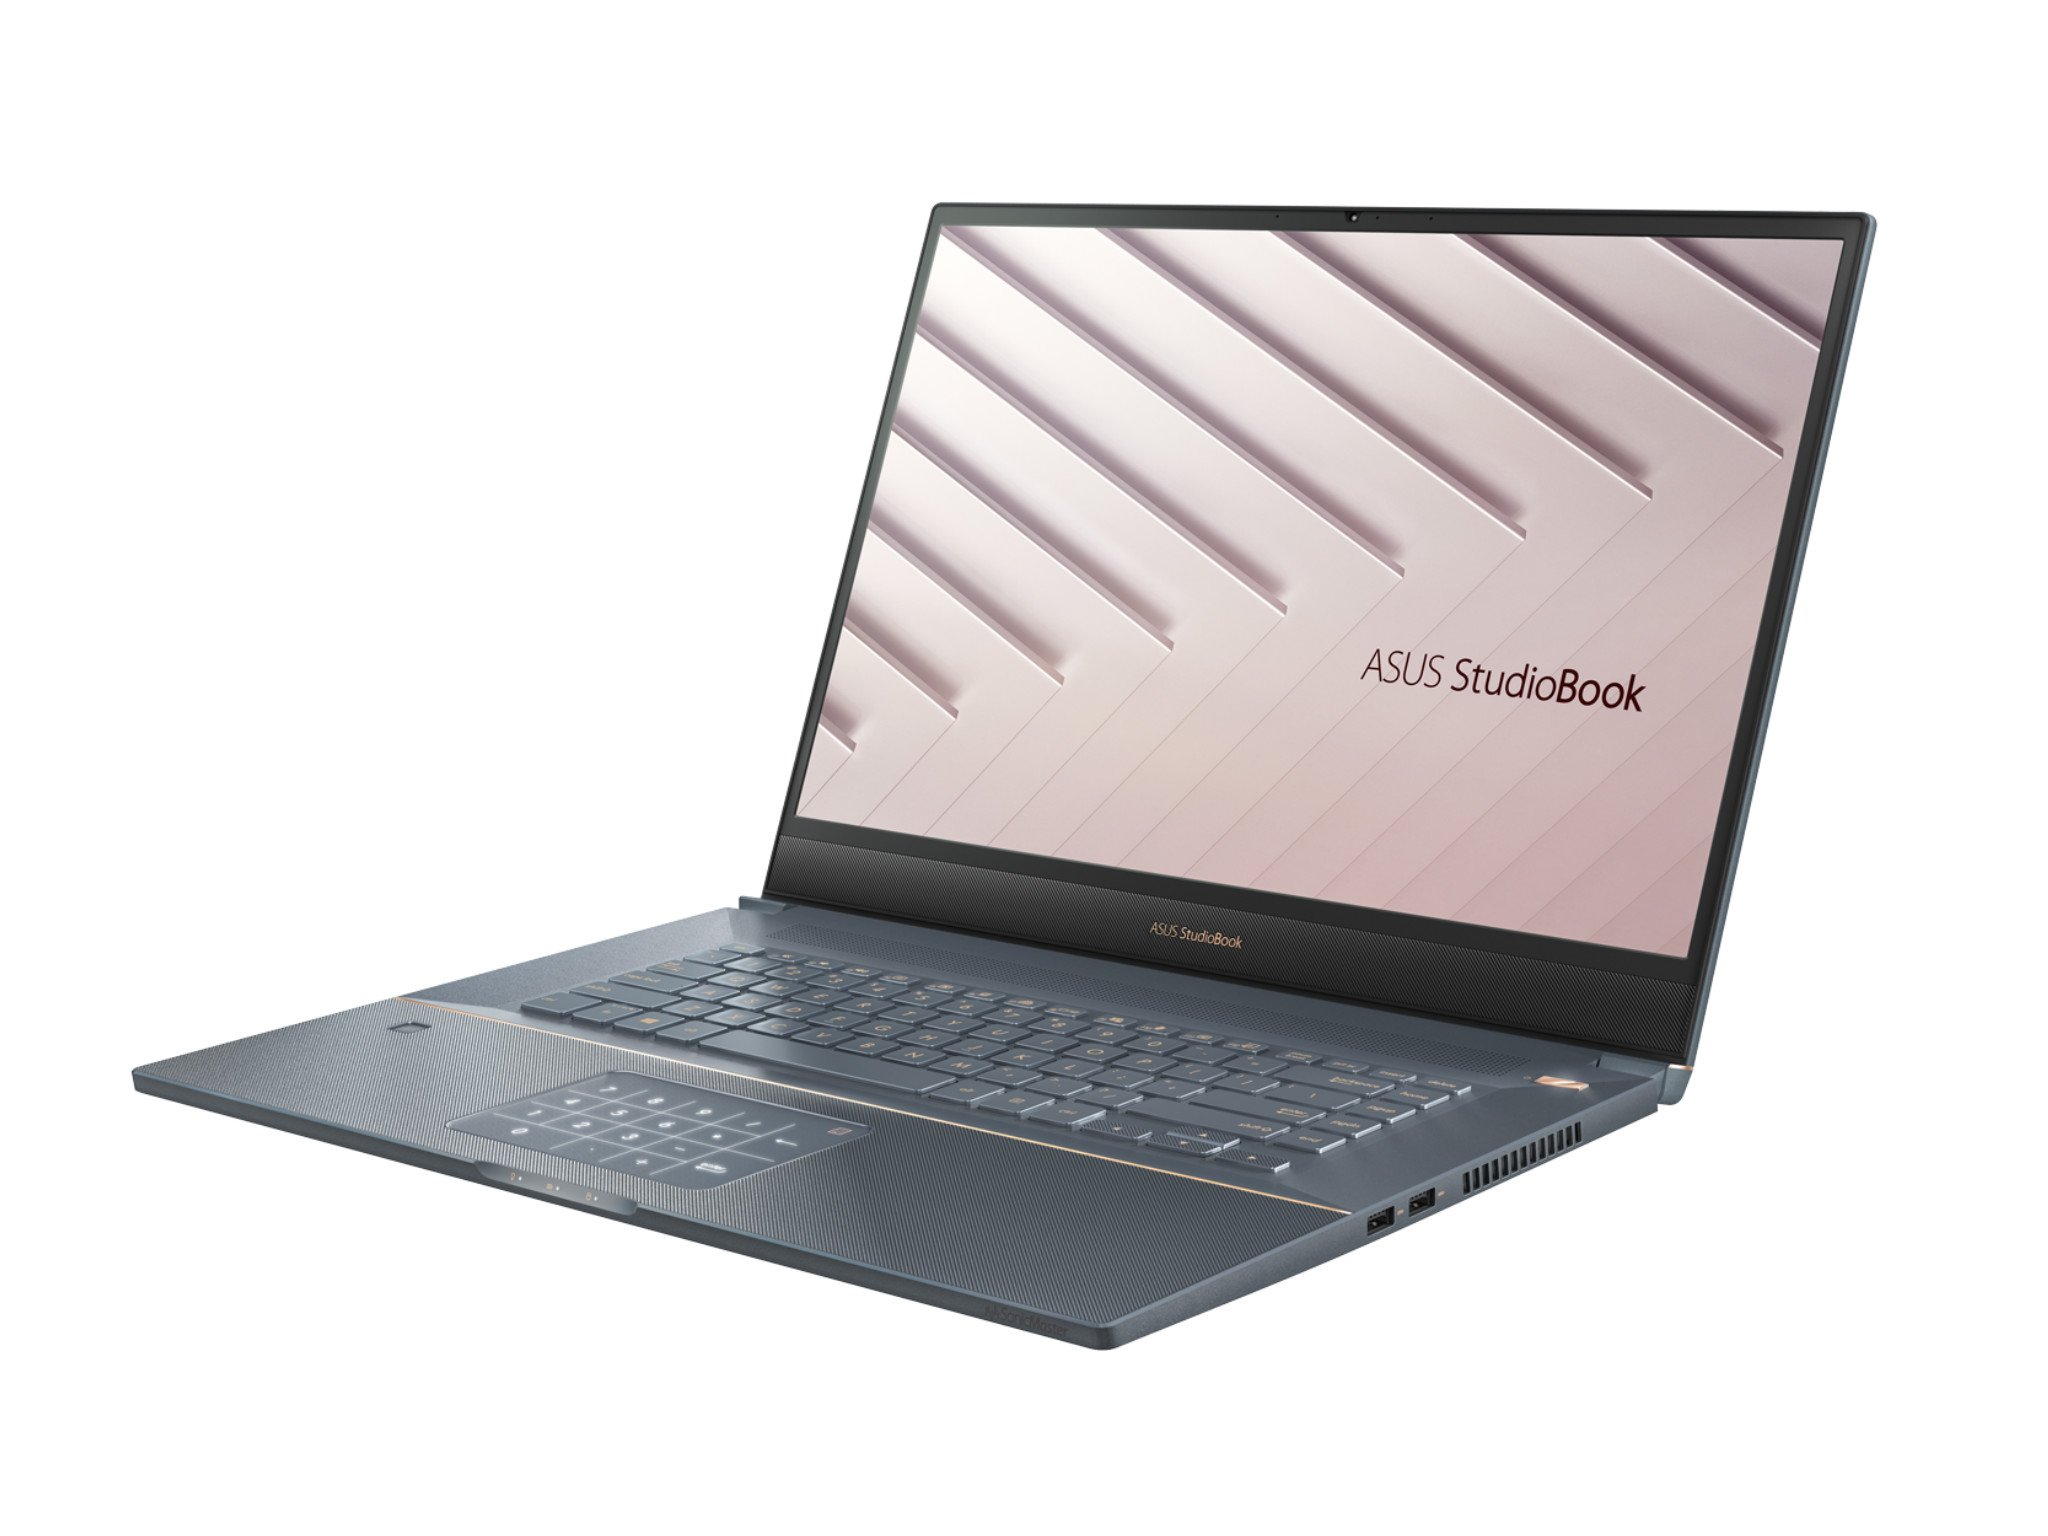 ASUS' StudioBook S for creators jams a 17-inch display in a 15-inch chassis